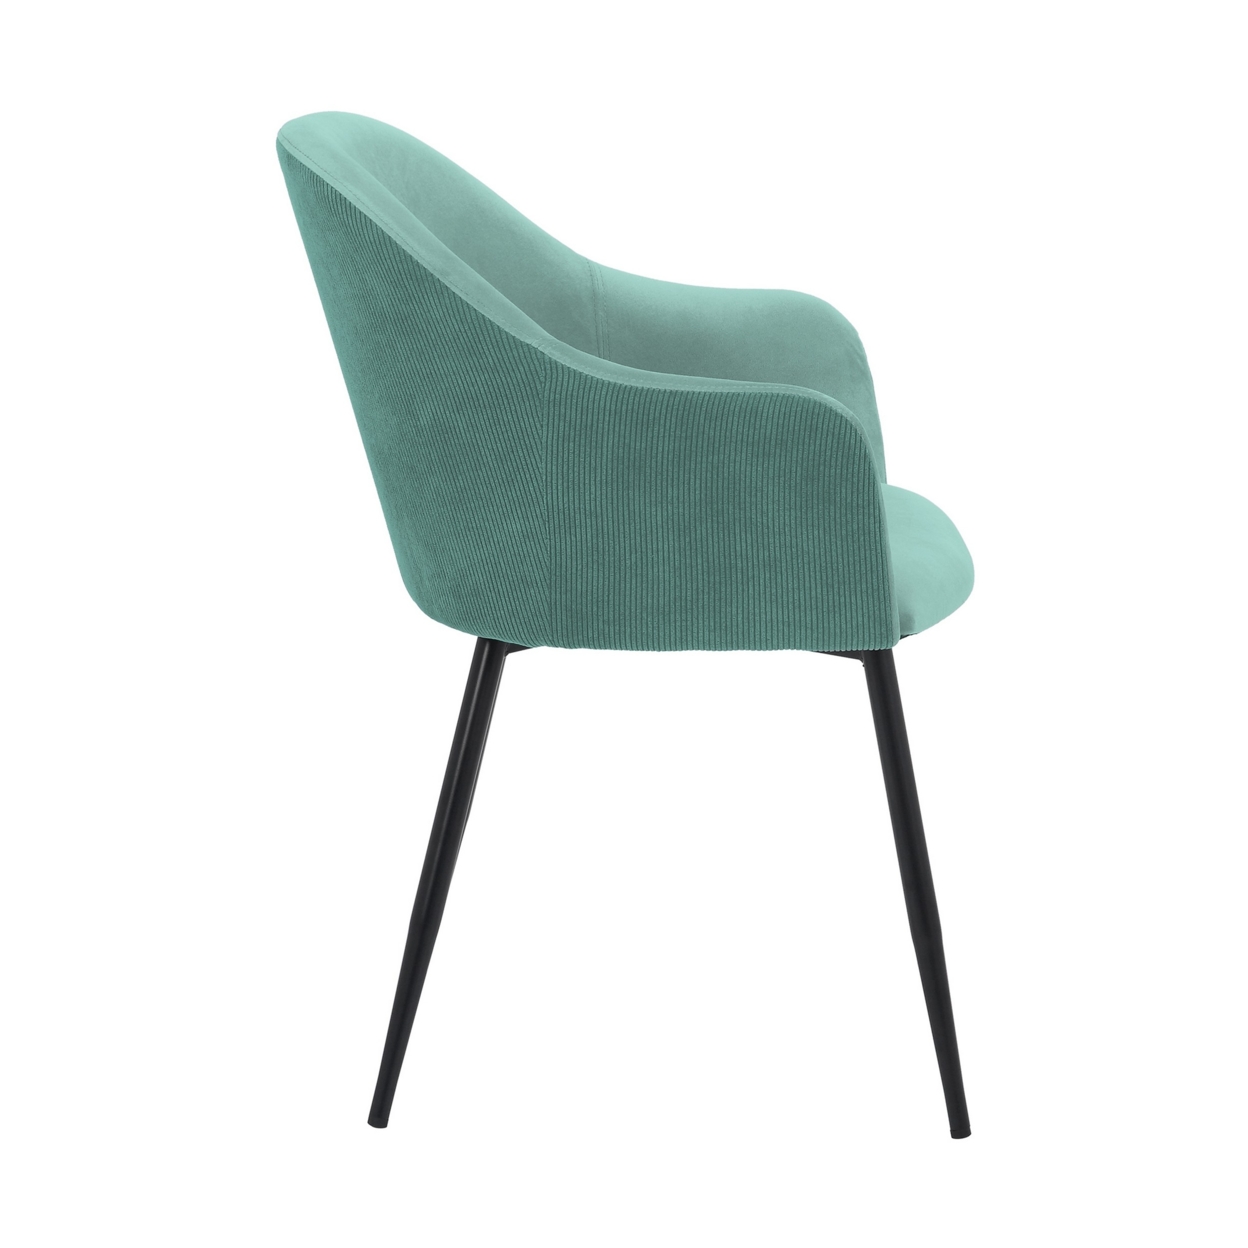 23 Inch Modern Dining Chair, Curved Back, Polyester, Metal Legs, Teal Blue- Saltoro Sherpi